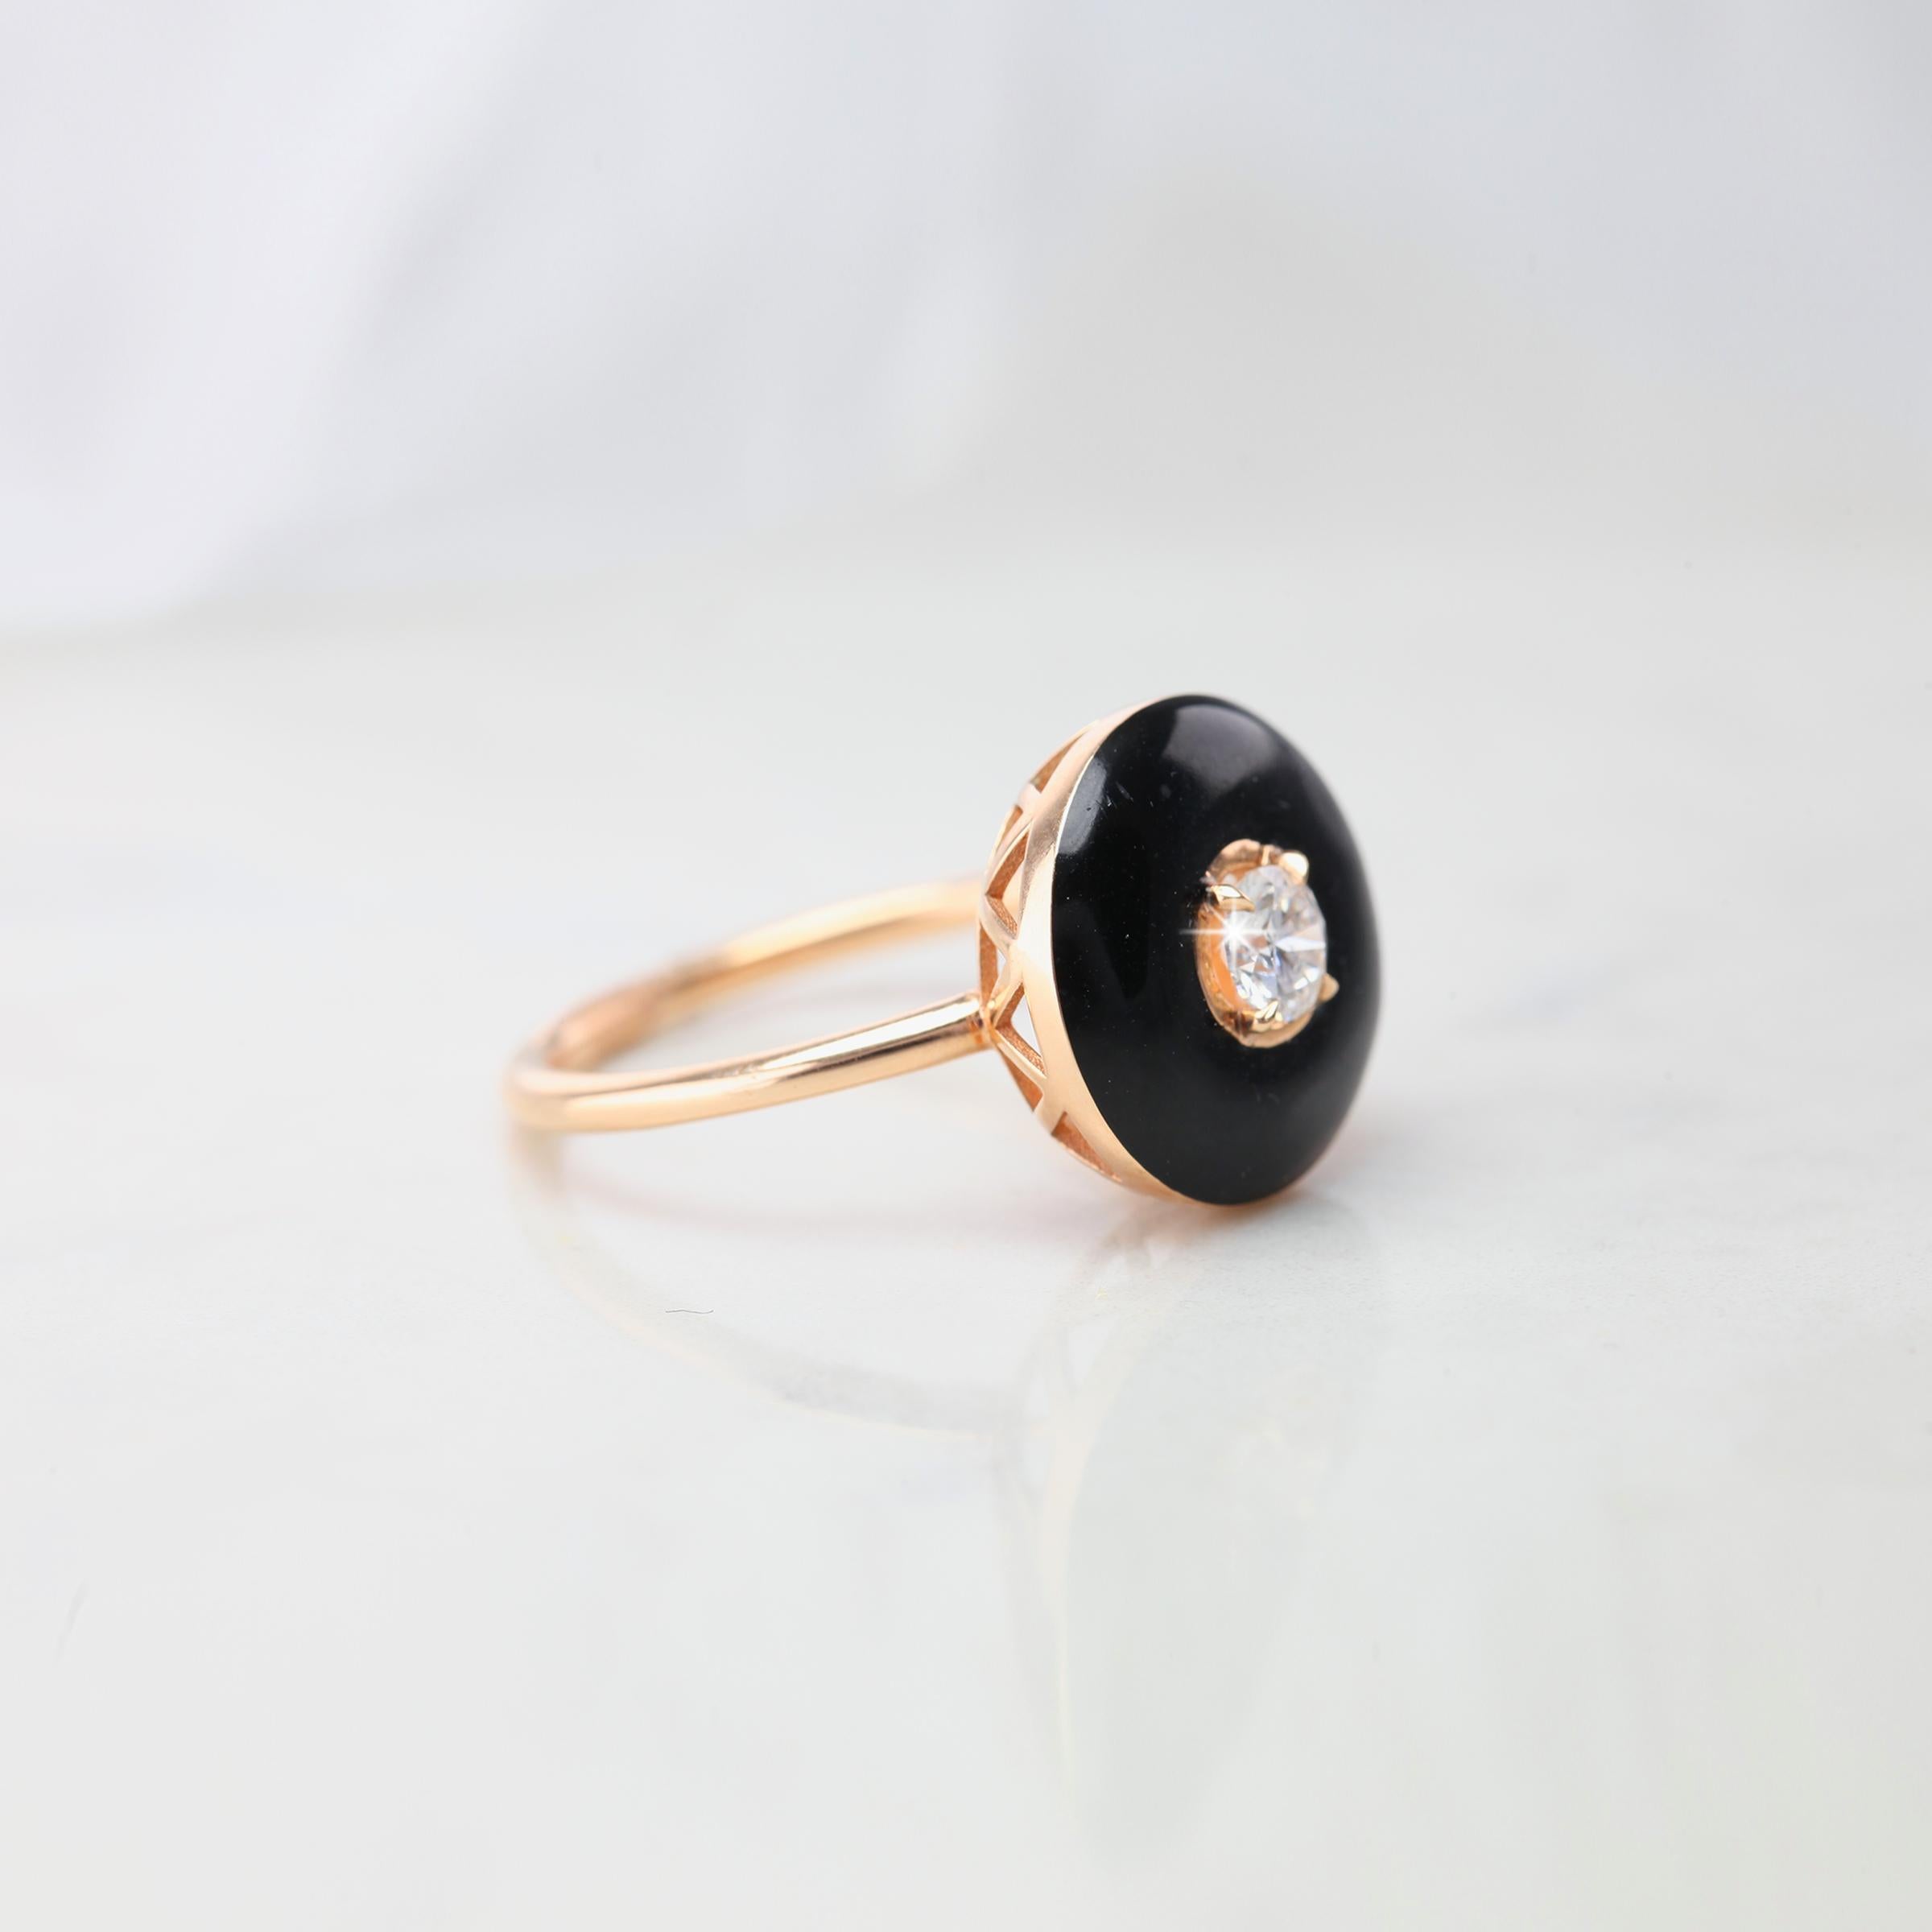 Art Deco Diamond Ring, Artdeco Pear Shape Rosecut Black Enameled Rose Gold Ring With Pave Setting Engagement Statement Ring created by hands from ring to the stone shapes. 

I used brillant black enameled to reveal an artdeco style round shape